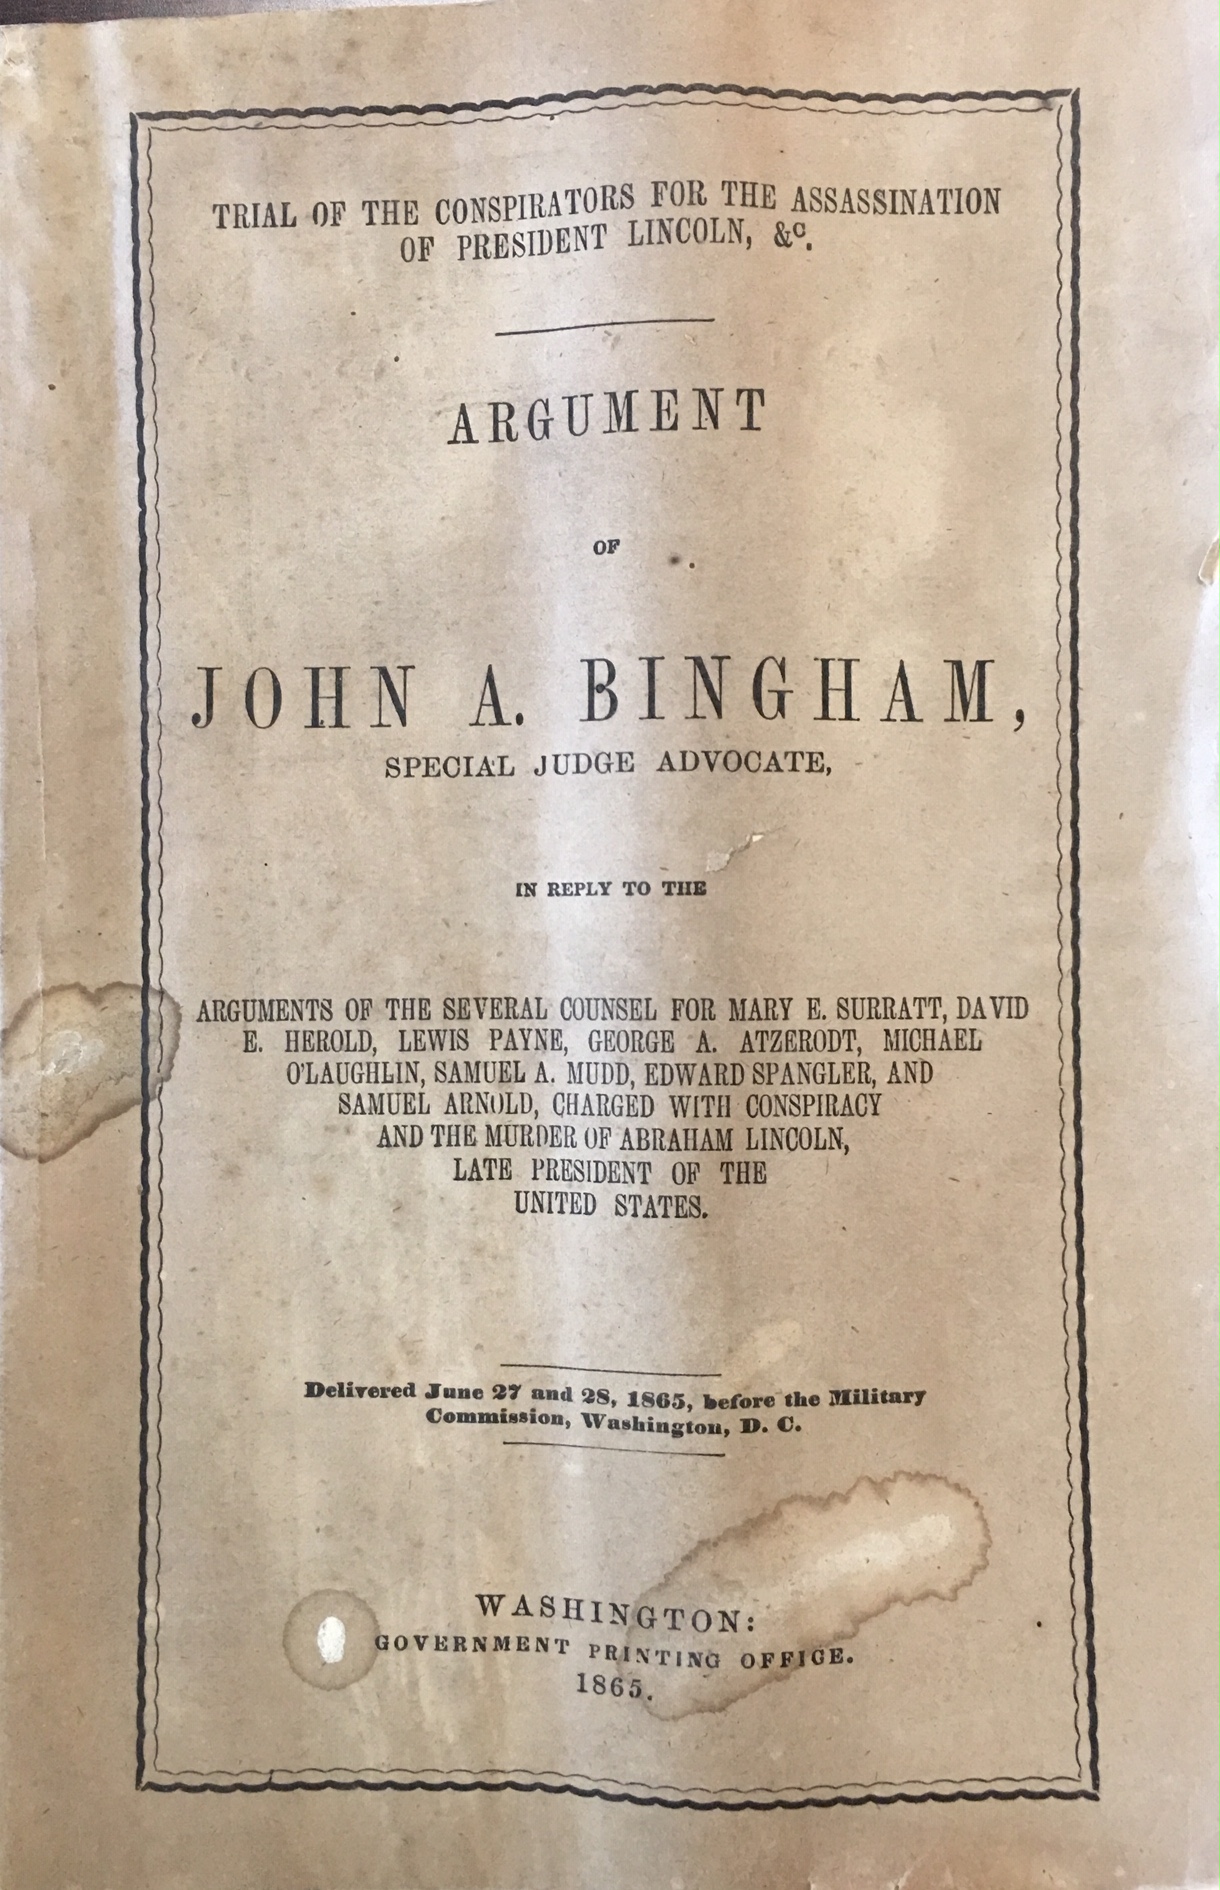 Image for Trial of the conspirators, for the assassination of President Lincoln, &c. : Argument of John A. Bingham, special judge advocate, in reply to the arguments of the several counsel for Mary E. Surratt, David E. Herold, Lewis Payne, George A. Atzerodt, Michael O'Laughlin, Samuel A. Mudd, Edward Spangler, and Samuel Arnold, charged with conspiracy and the murder of Abraham Lincoln, late president of the United States. Delivered June 27 and 28, 1865, before the Military commission, Washington, D.C.